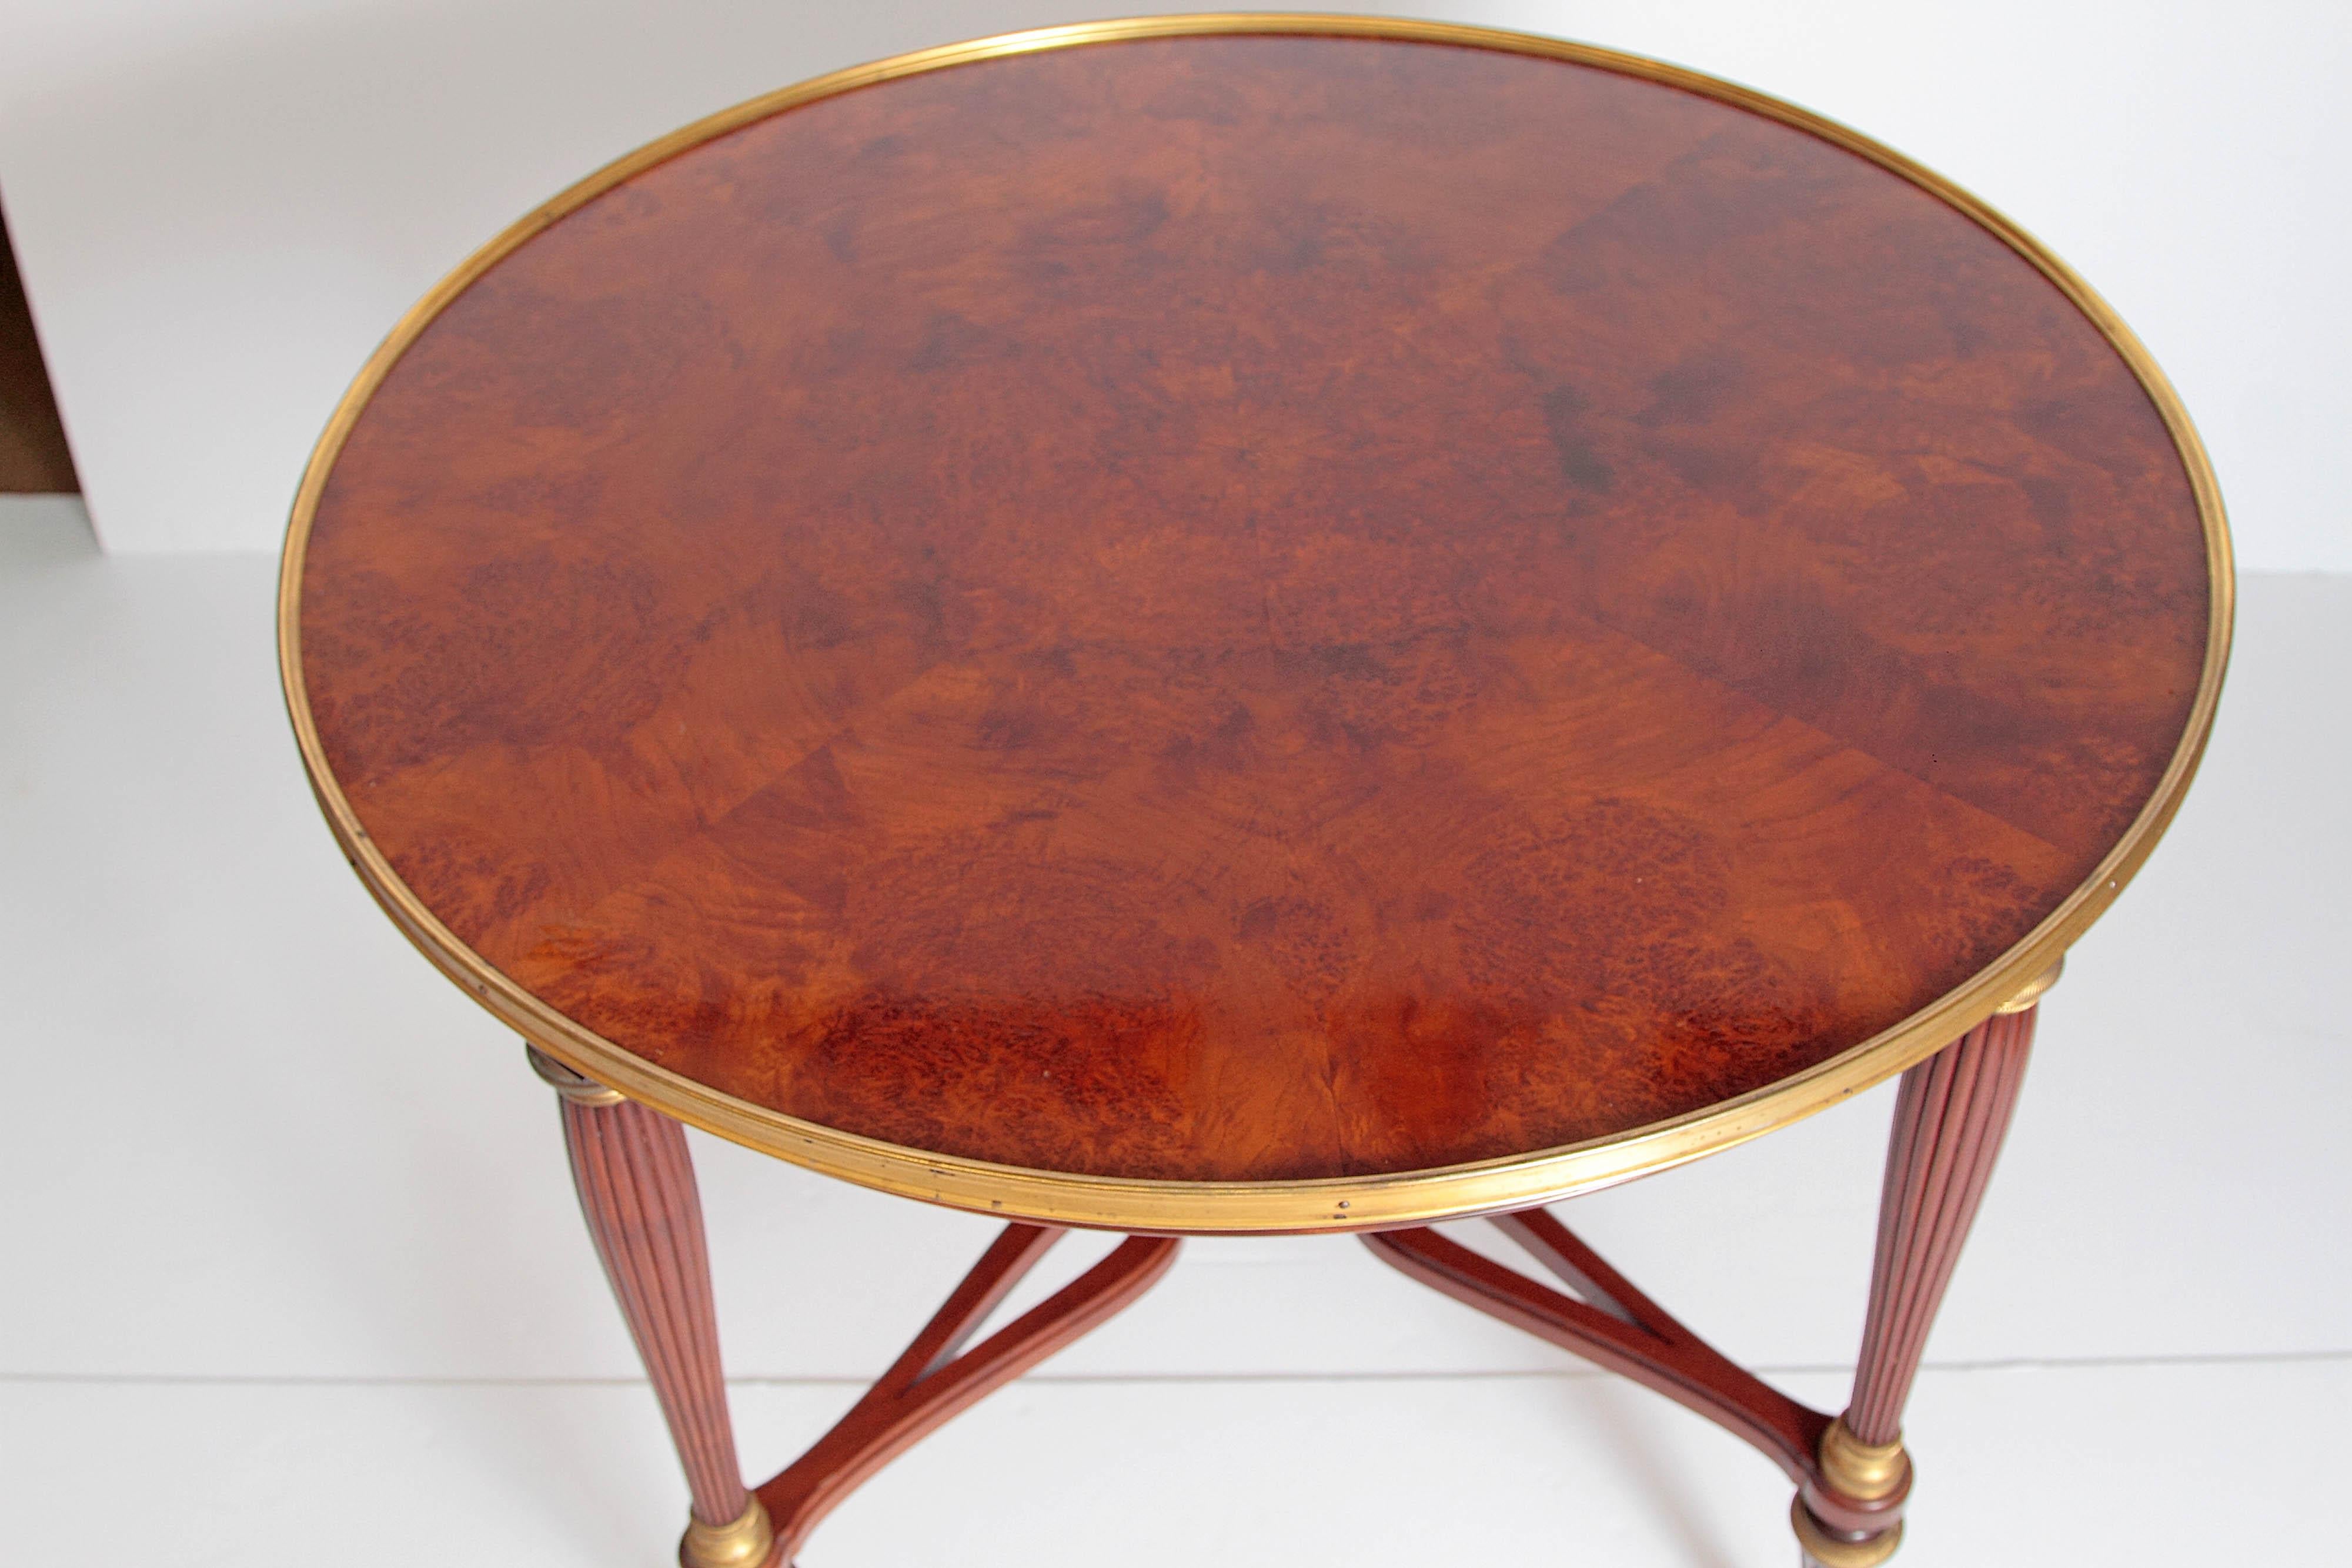 Hand-Carved 19th Century Russian Neoclassical Centre Table with Burled Walnut Top